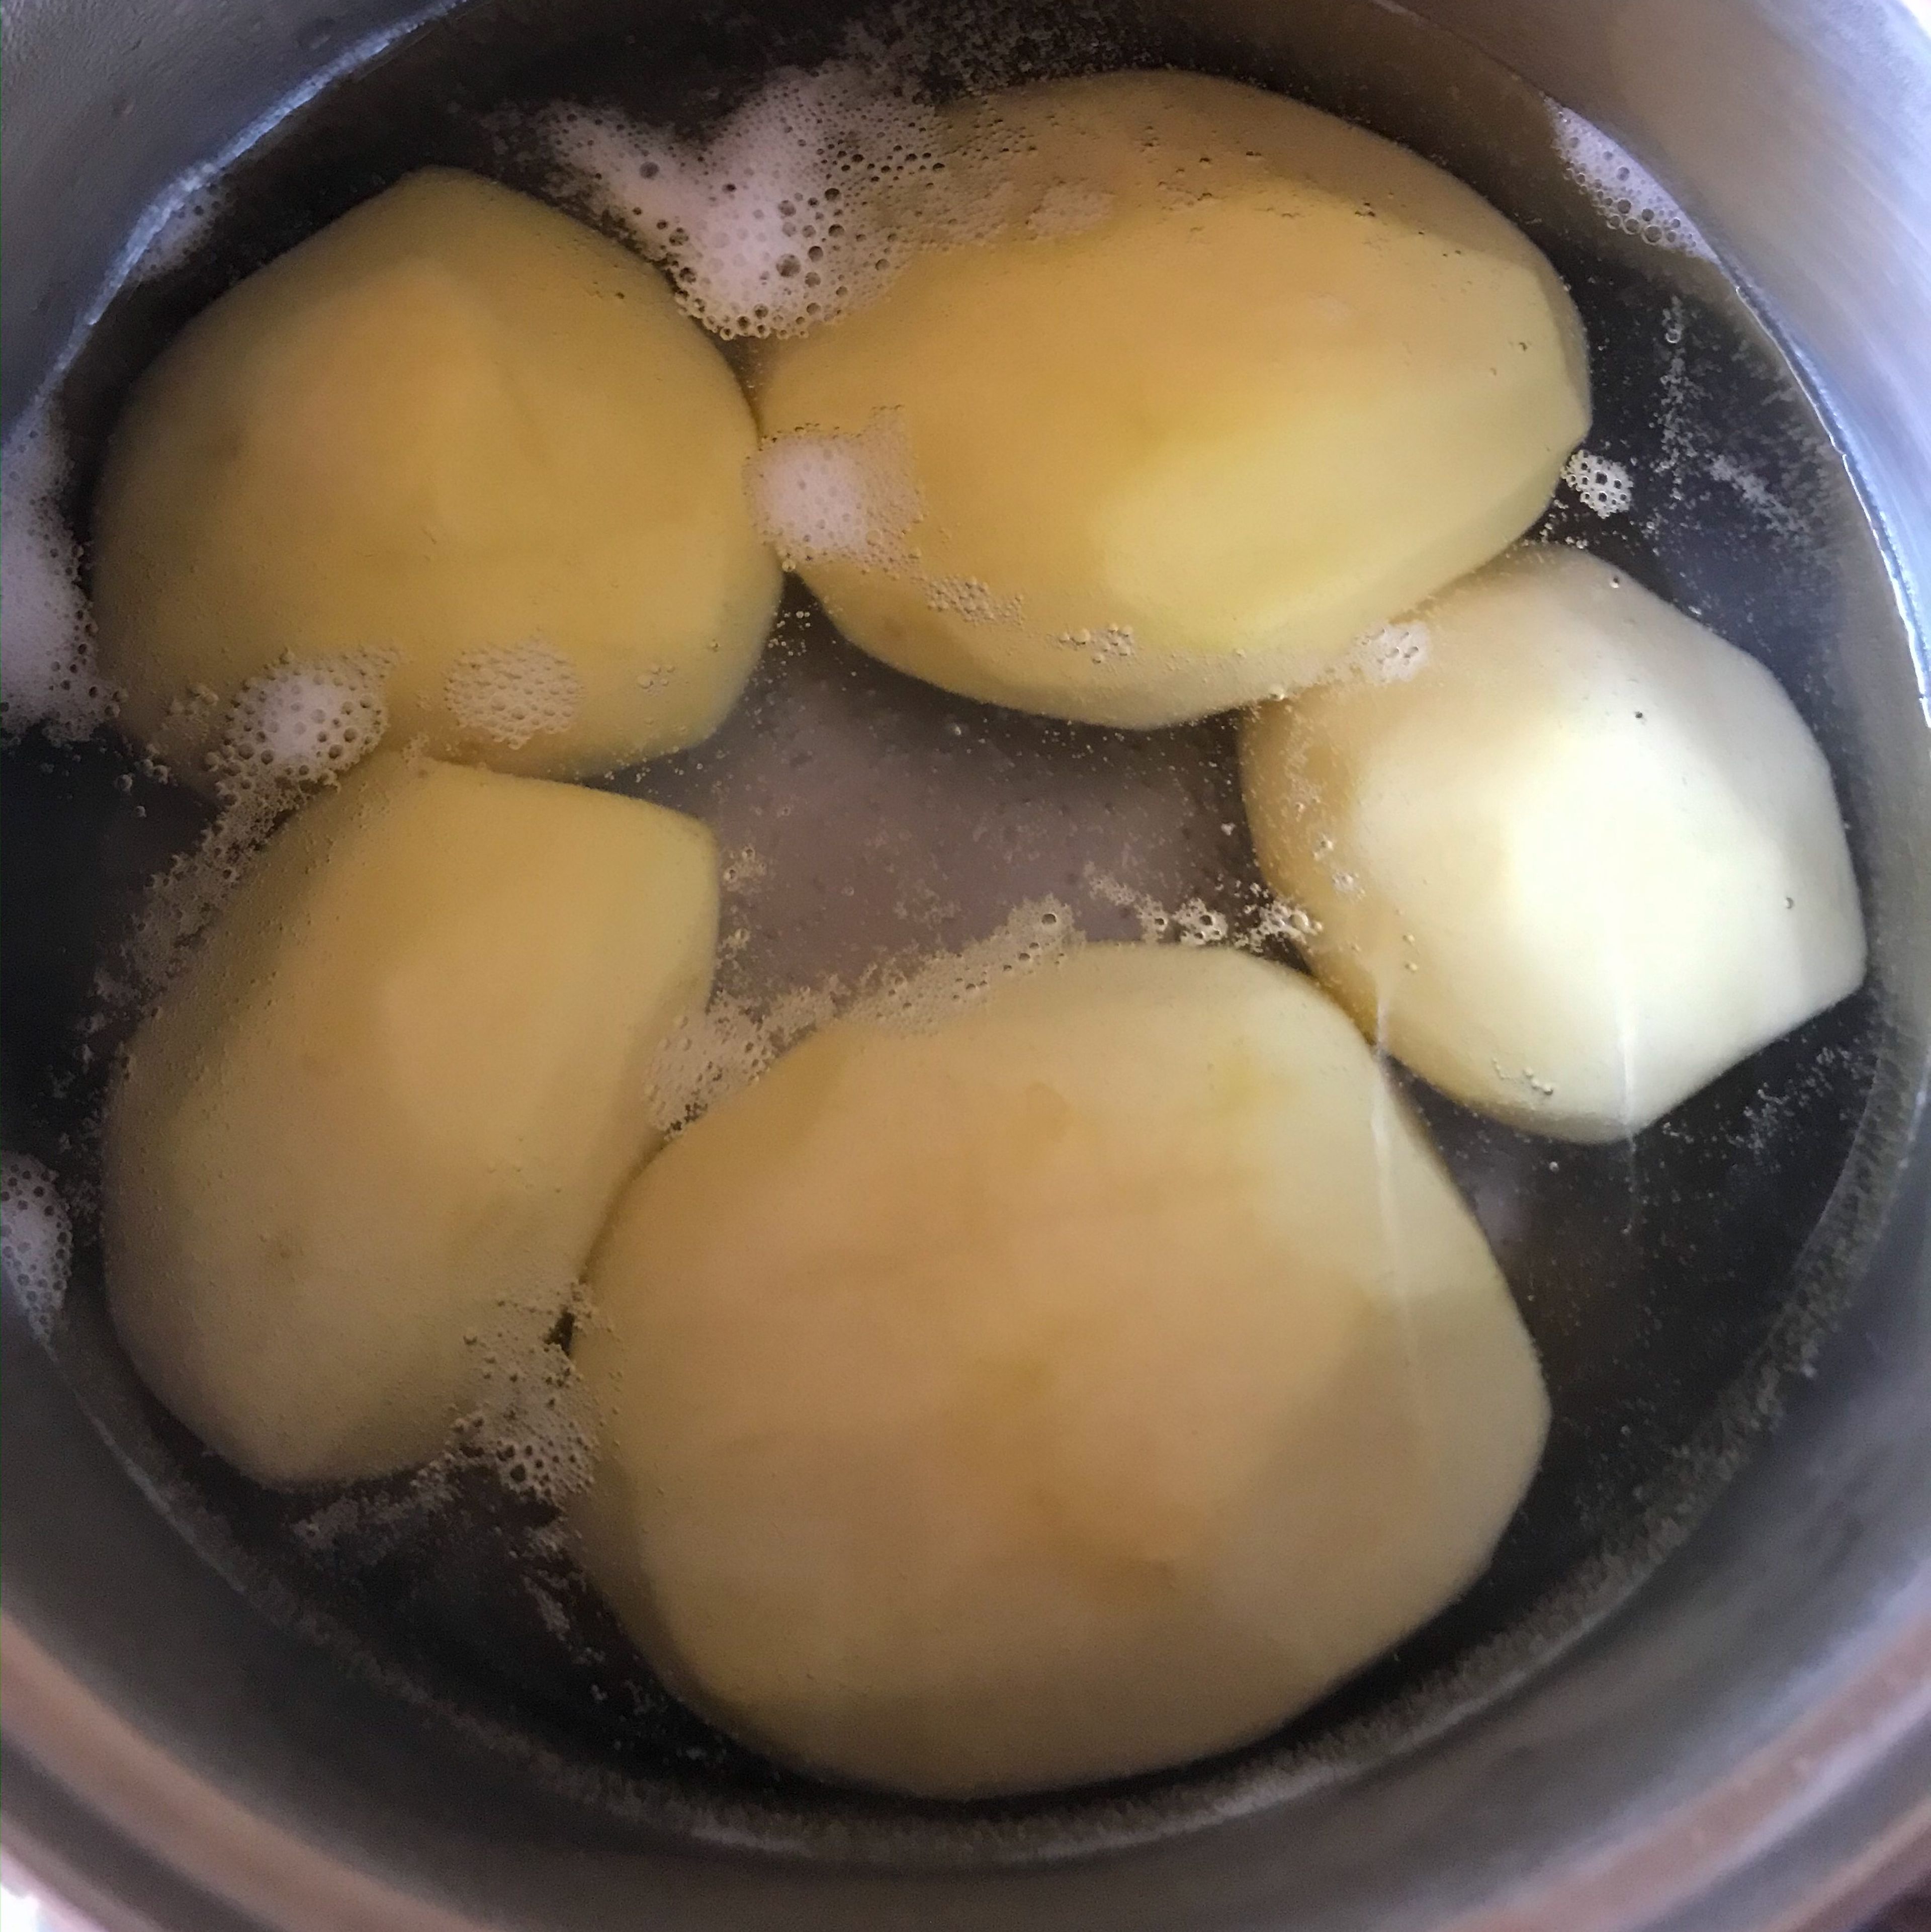 Boil the potatoes on hot water.